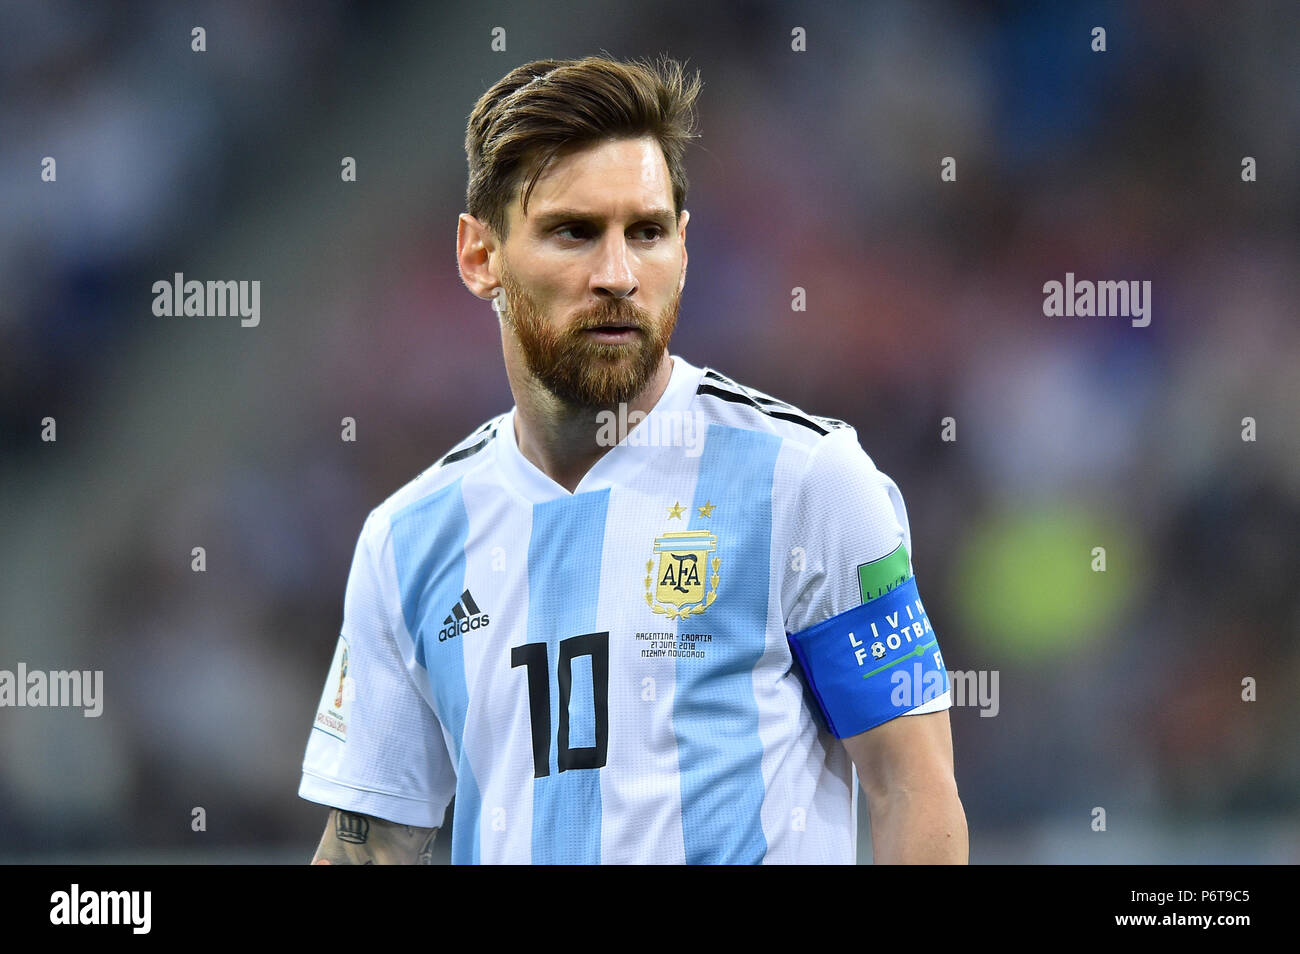 NIZHNIY NOVGOROD, RUSSIA - JUNE 21: Lionel Messi of Argentina looks on during the 2018 FIFA World Cup Russia group D match between Argentina and Croatia at Nizhniy Novgorod Stadium on June 21, 2018 in Nizhniy Novgorod, Russia. (Photo by Lukasz Laskowski/PressFocus/MB Media) Stock Photo